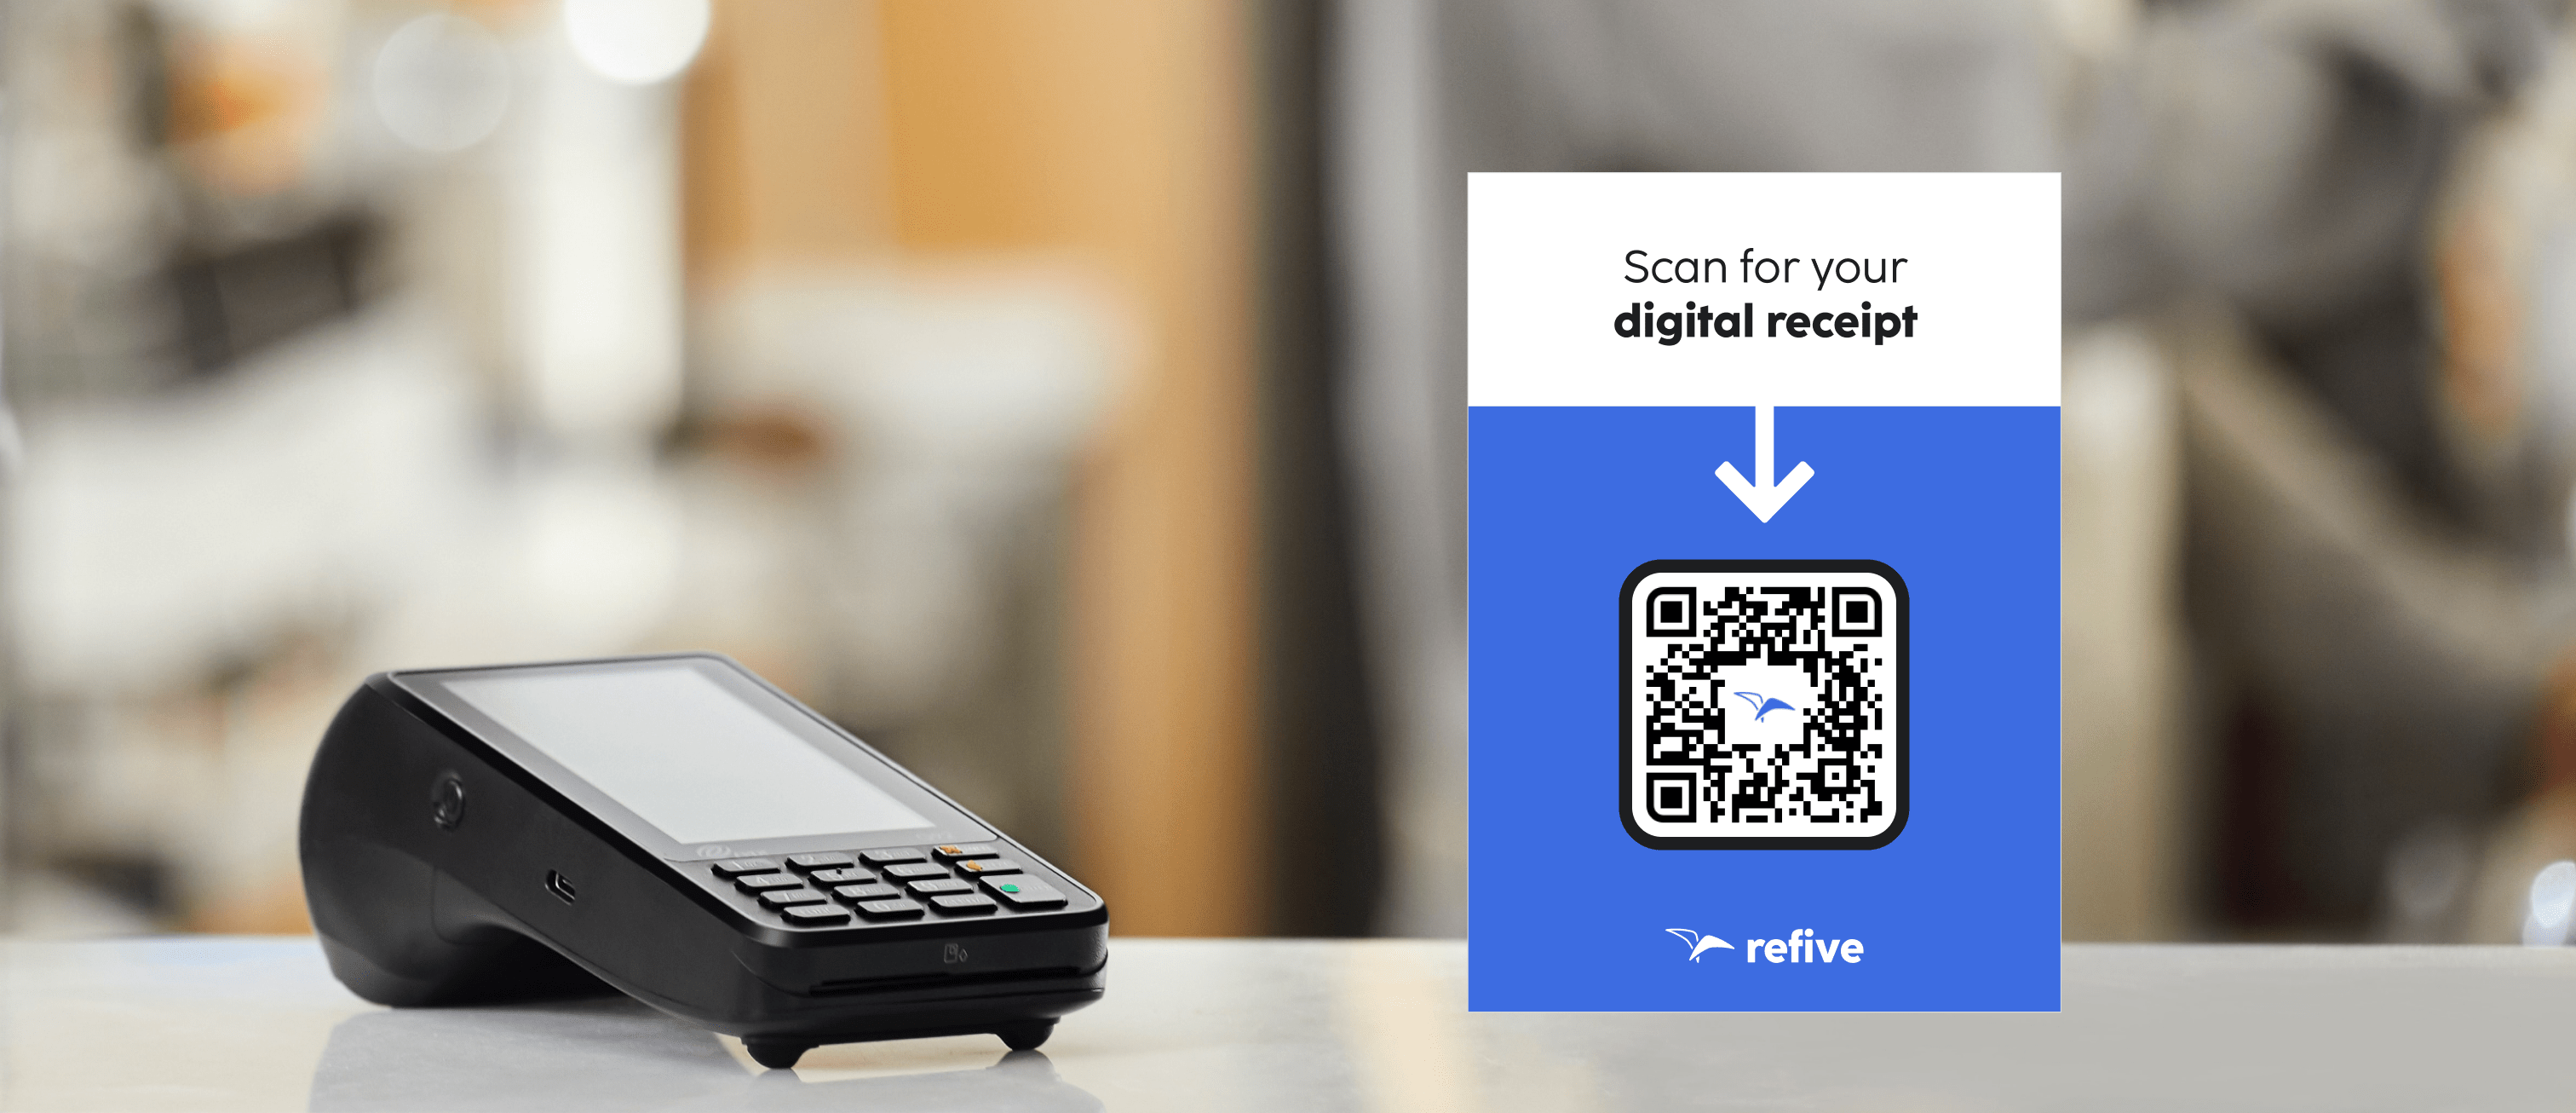 refive QR code at cashier to provide electronic receipts